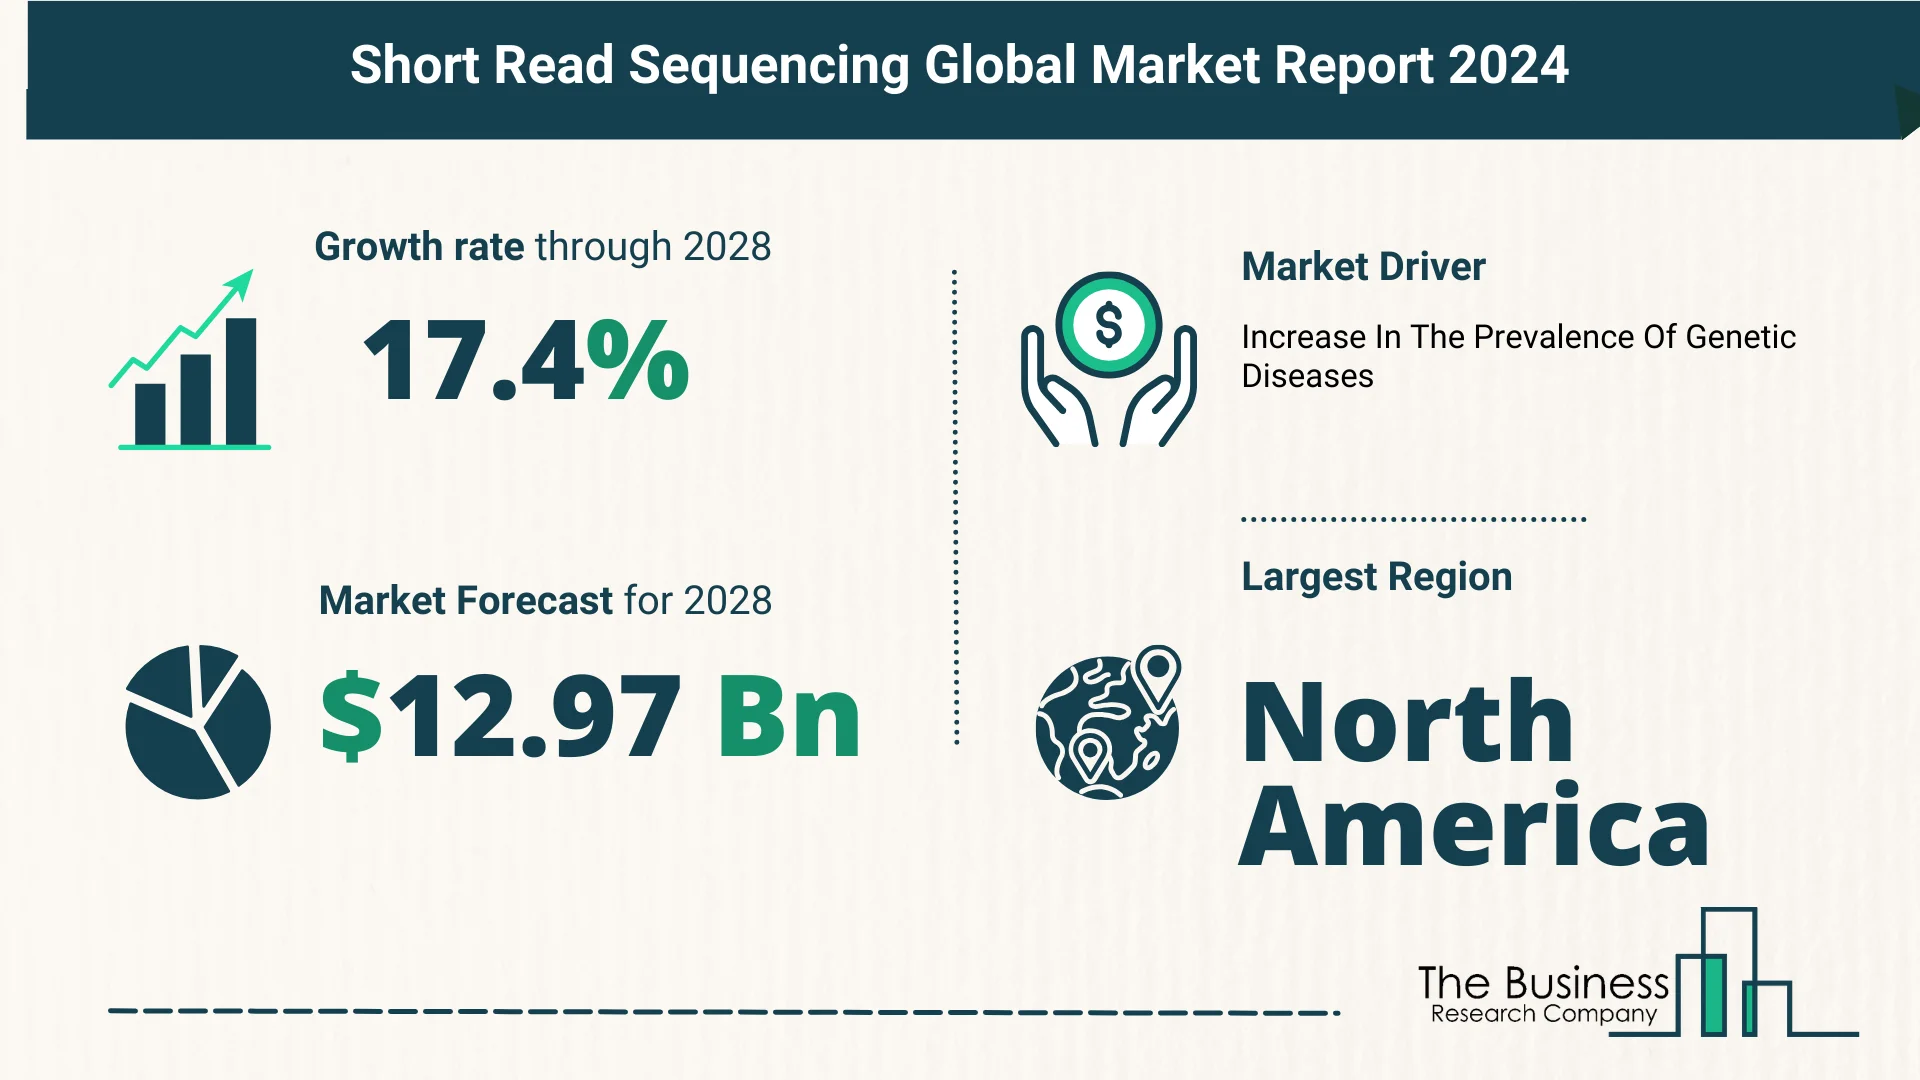 Global Short Read Sequencing Market Size